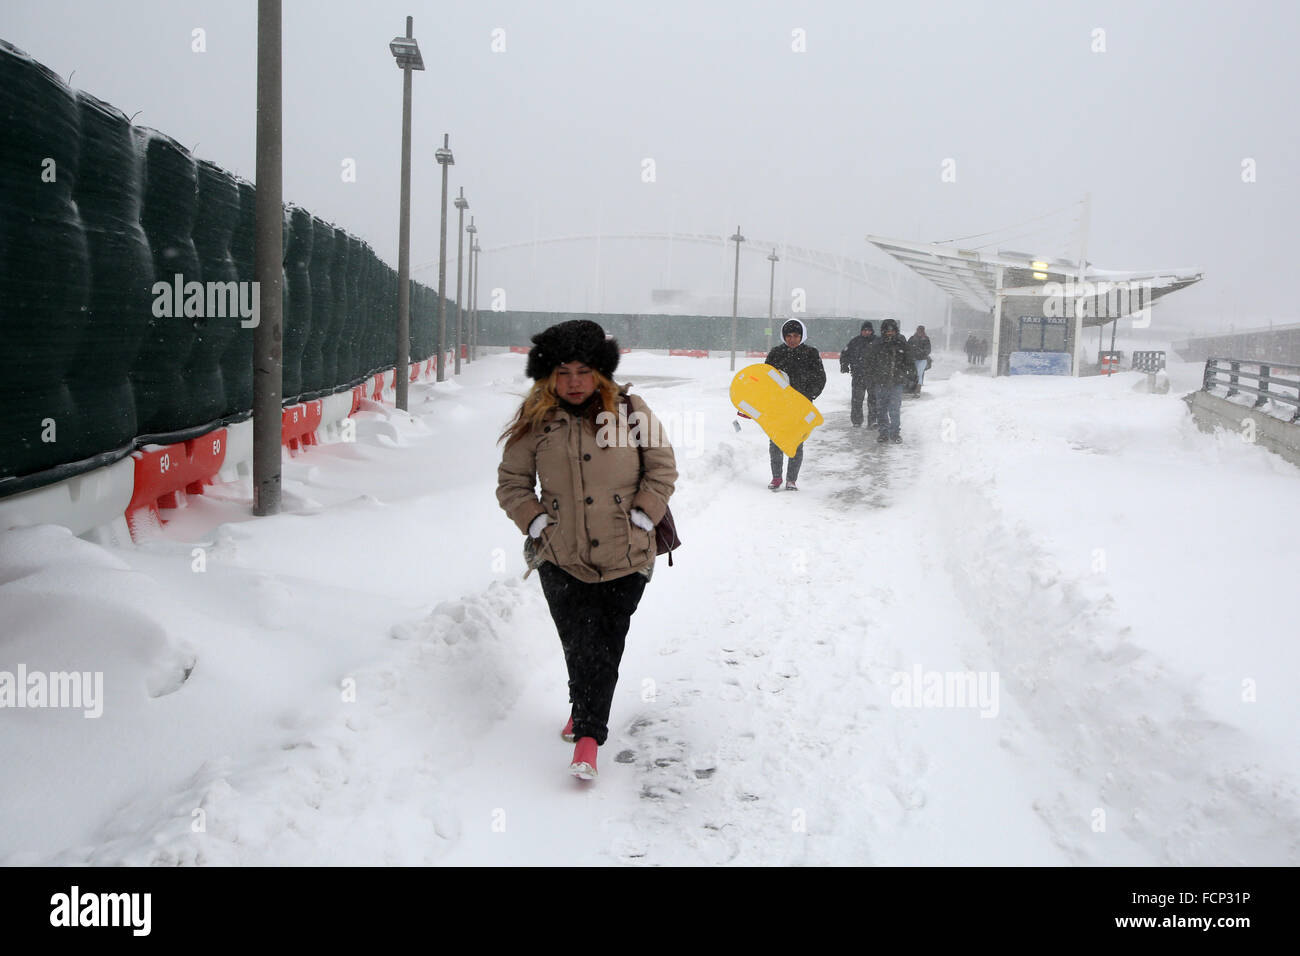 New York, New York, USA. 23rd Jan, 2016. People walk from the Staten Island Ferry St. George terminal from Manhattan during Winter Storm Jonas. A travel ban had been in place for hours, but the ferry still operated. Snowfall projections for Staten Island were approximately 12-18in, with winds gusting up to 50 miles an hour. Late afternoon, buses ceased to run and a travel ban was enforced by the NYPD. This lack of transportation stranded many residents of Staten Island who had taken the ferry home. People were forced to try and walk to their destination in the blizzard. New York Governor Cuo Stock Photo